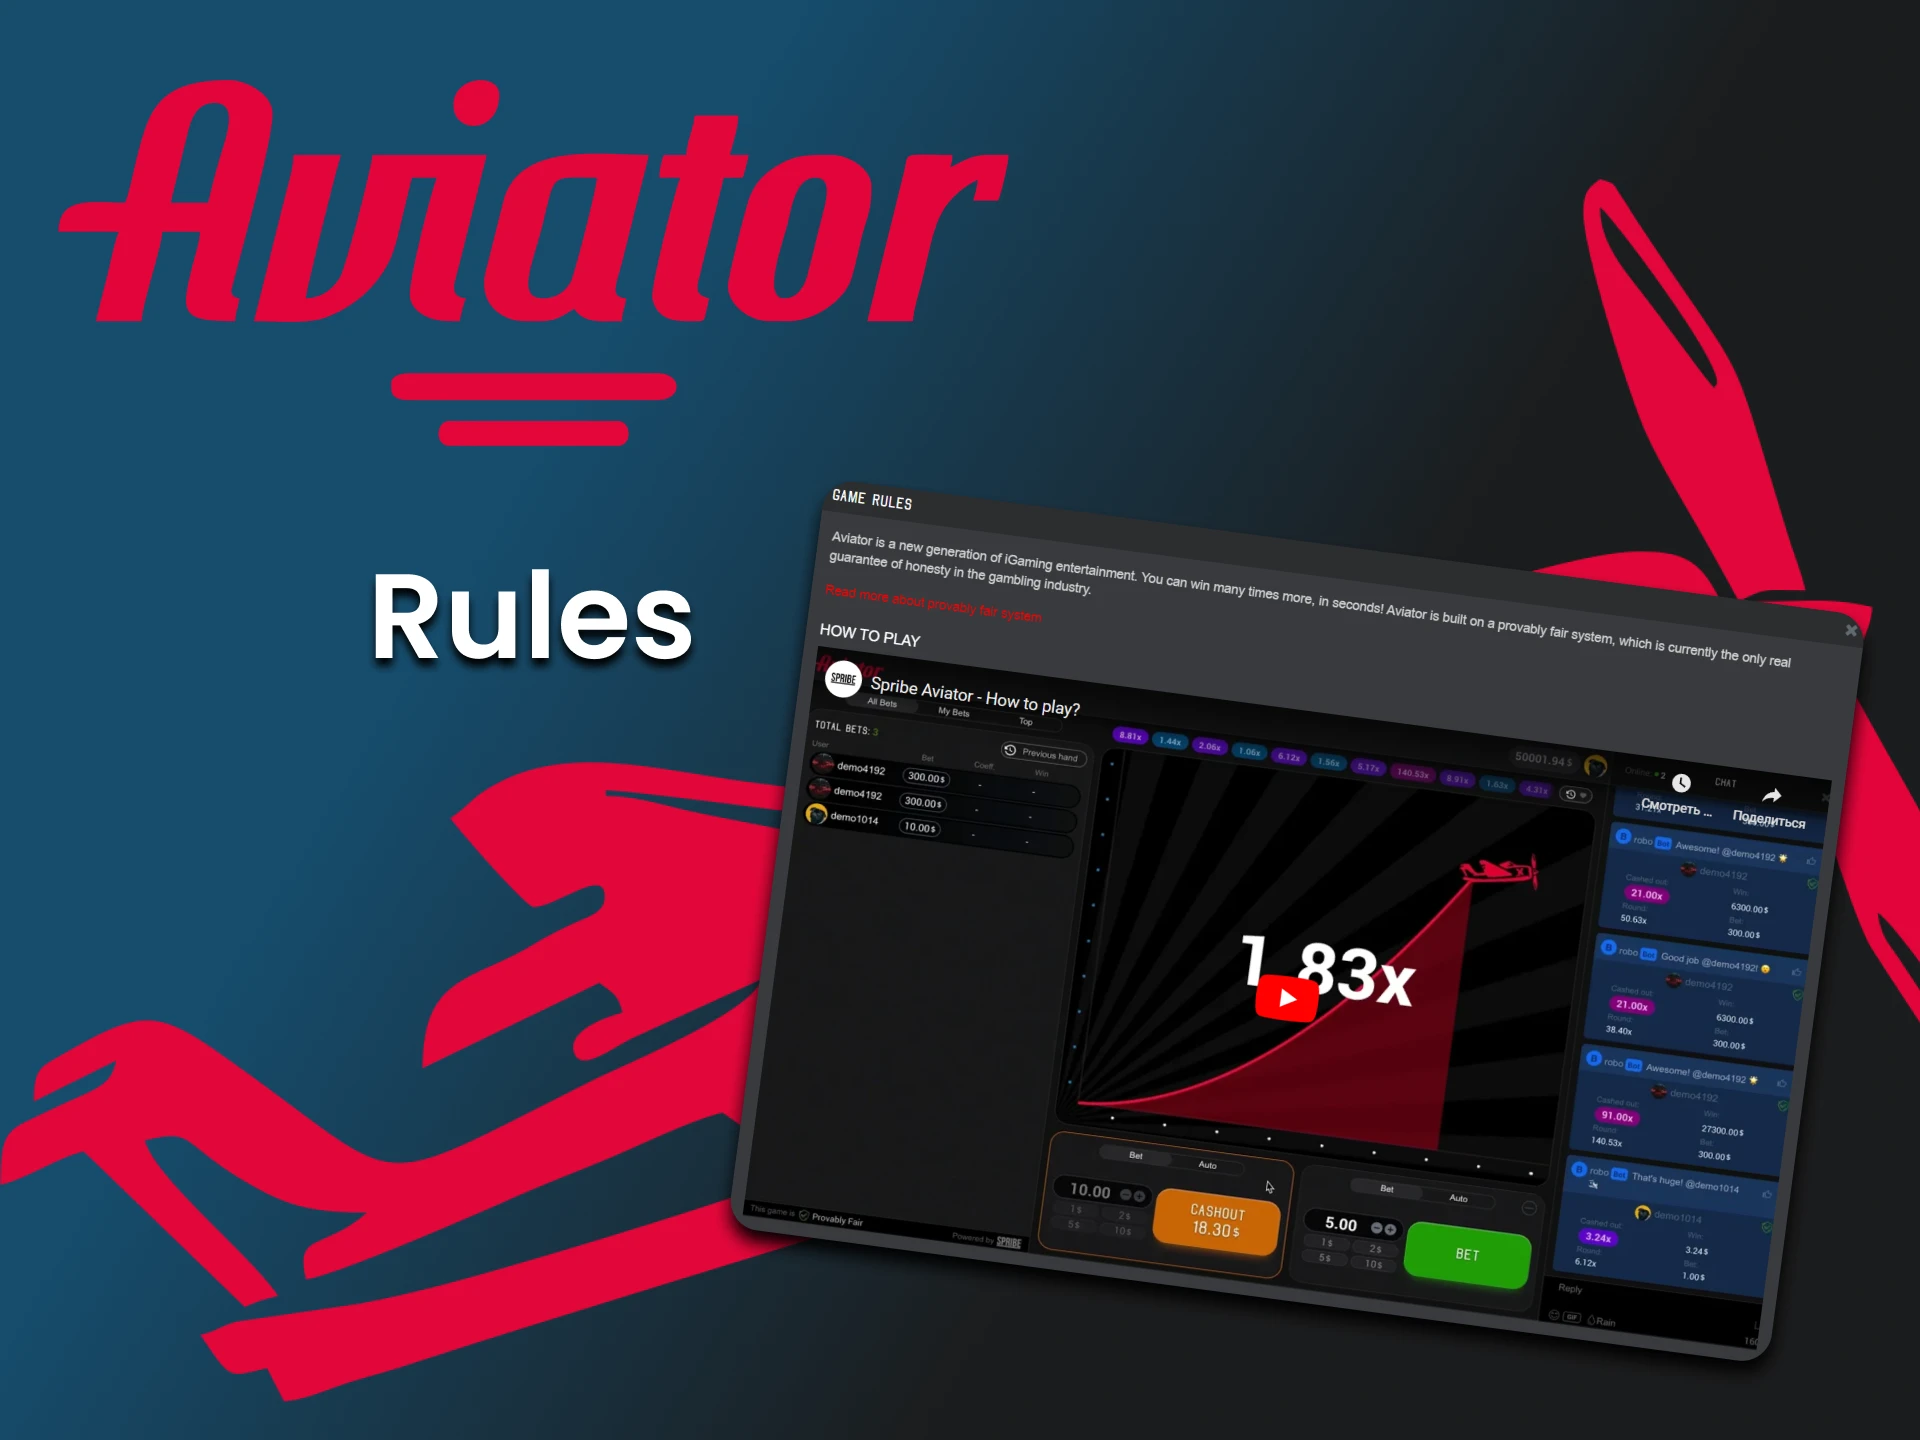 Learn all about the rules of the Aviator game.